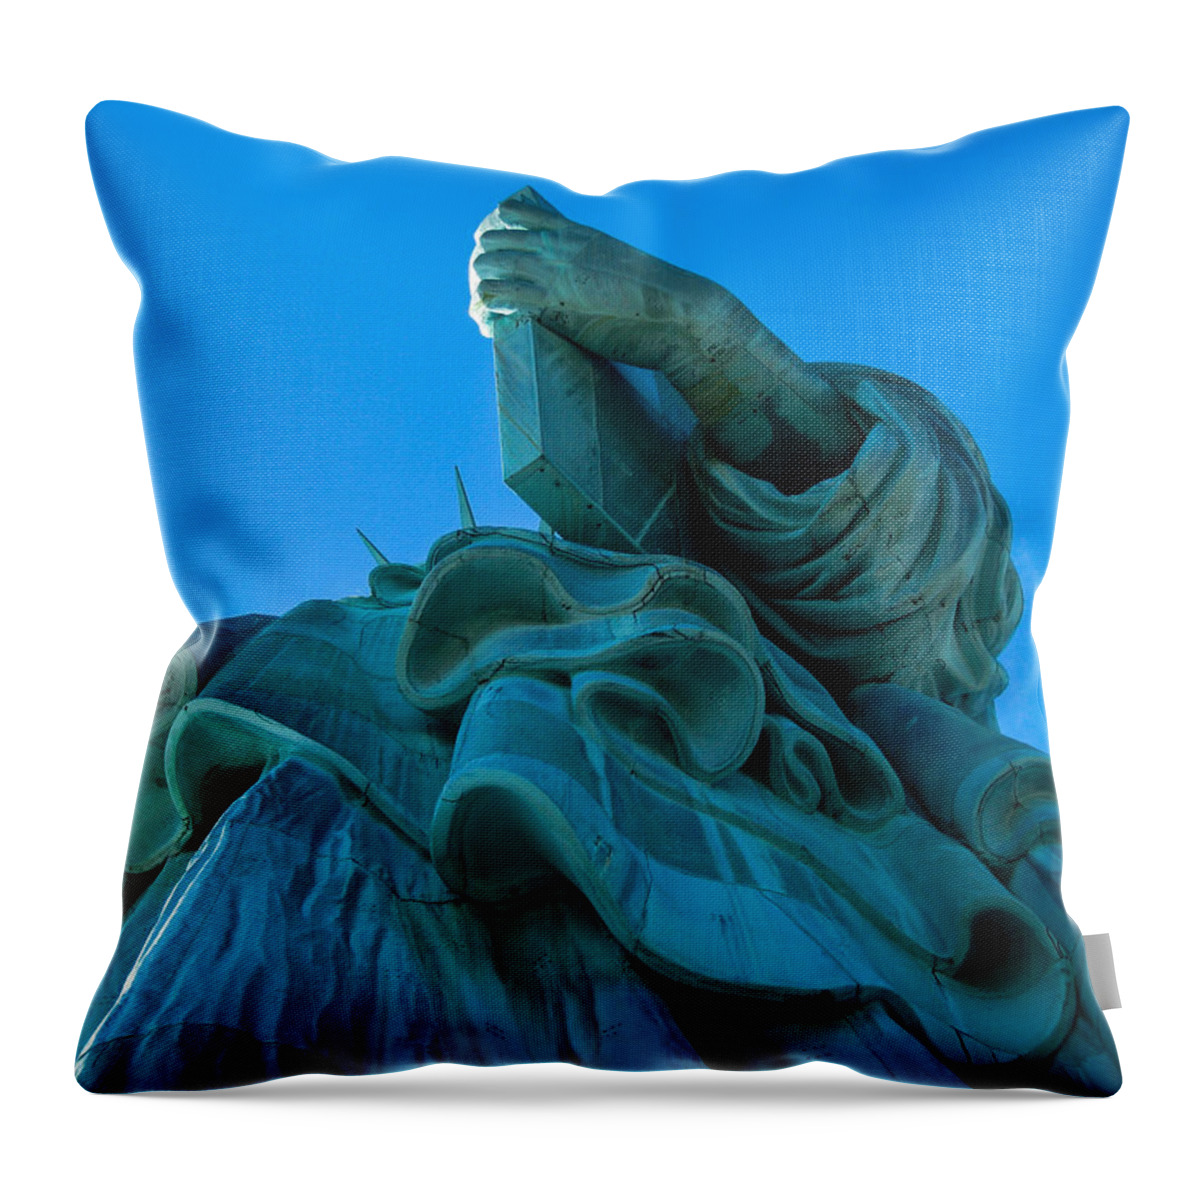 New York Throw Pillow featuring the photograph Lady Liberty by Gera Photography